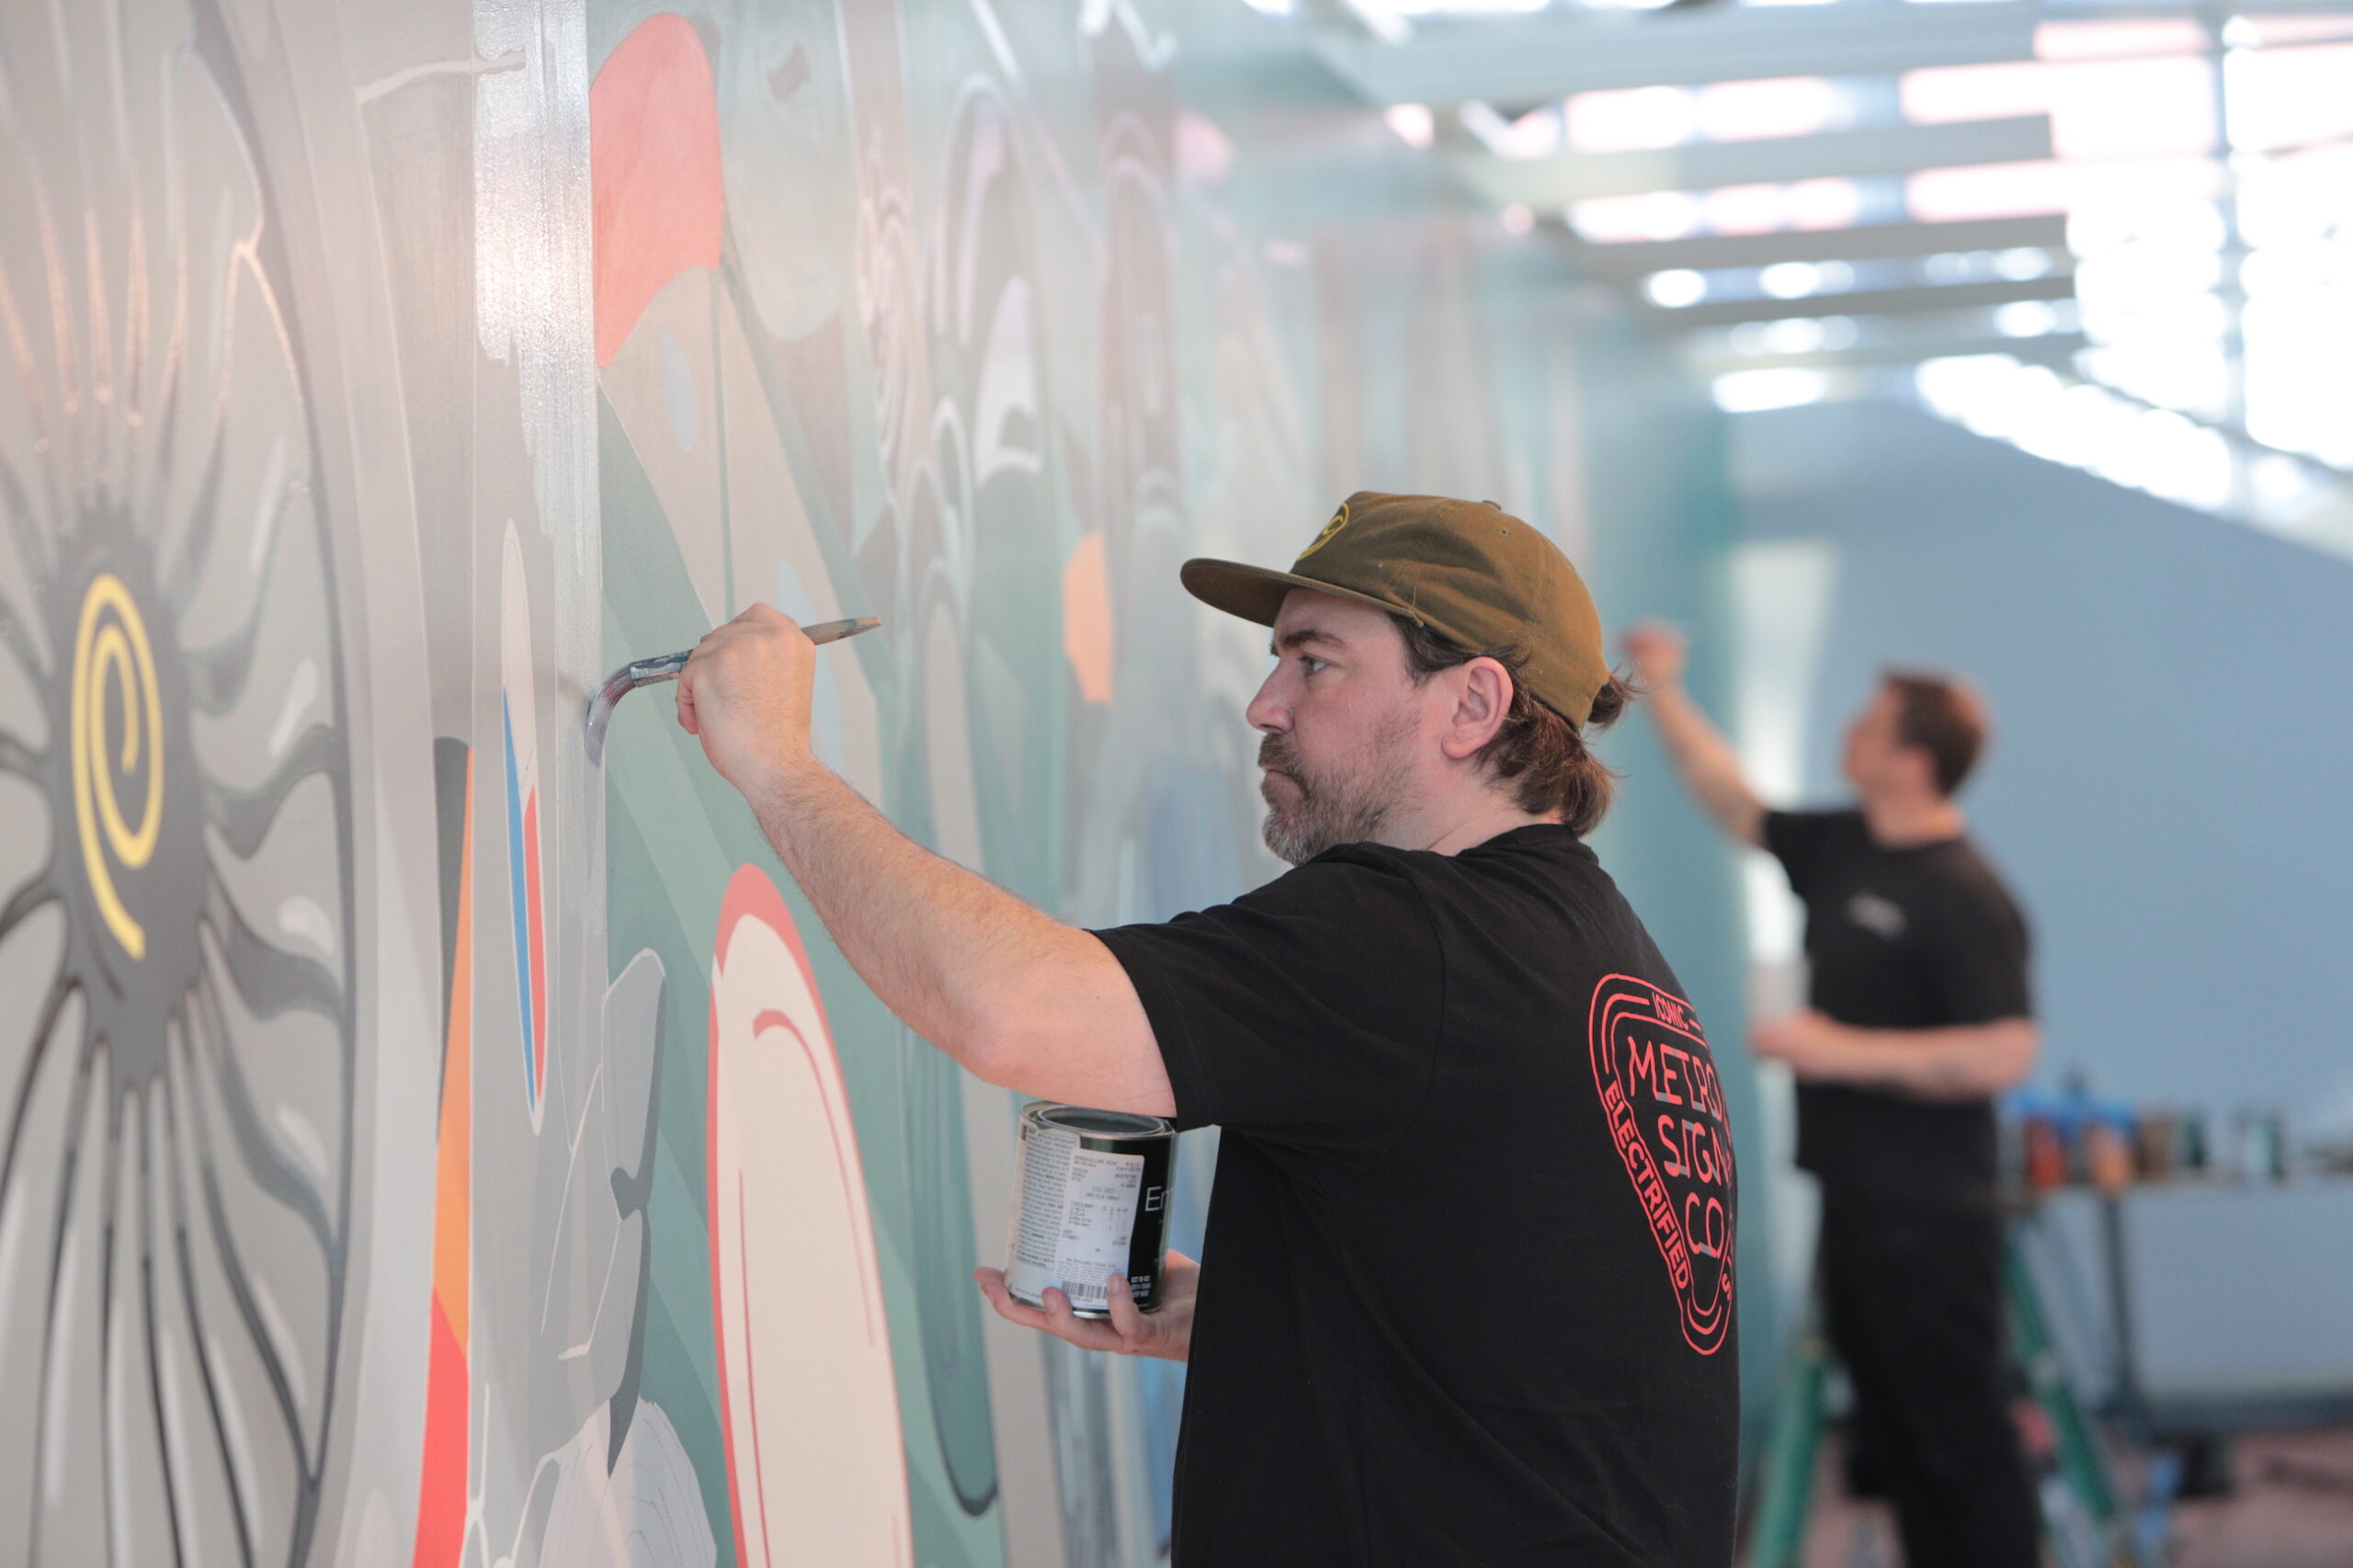 A white man wearing a baseball cap and black shirt paints a mural on a wall.